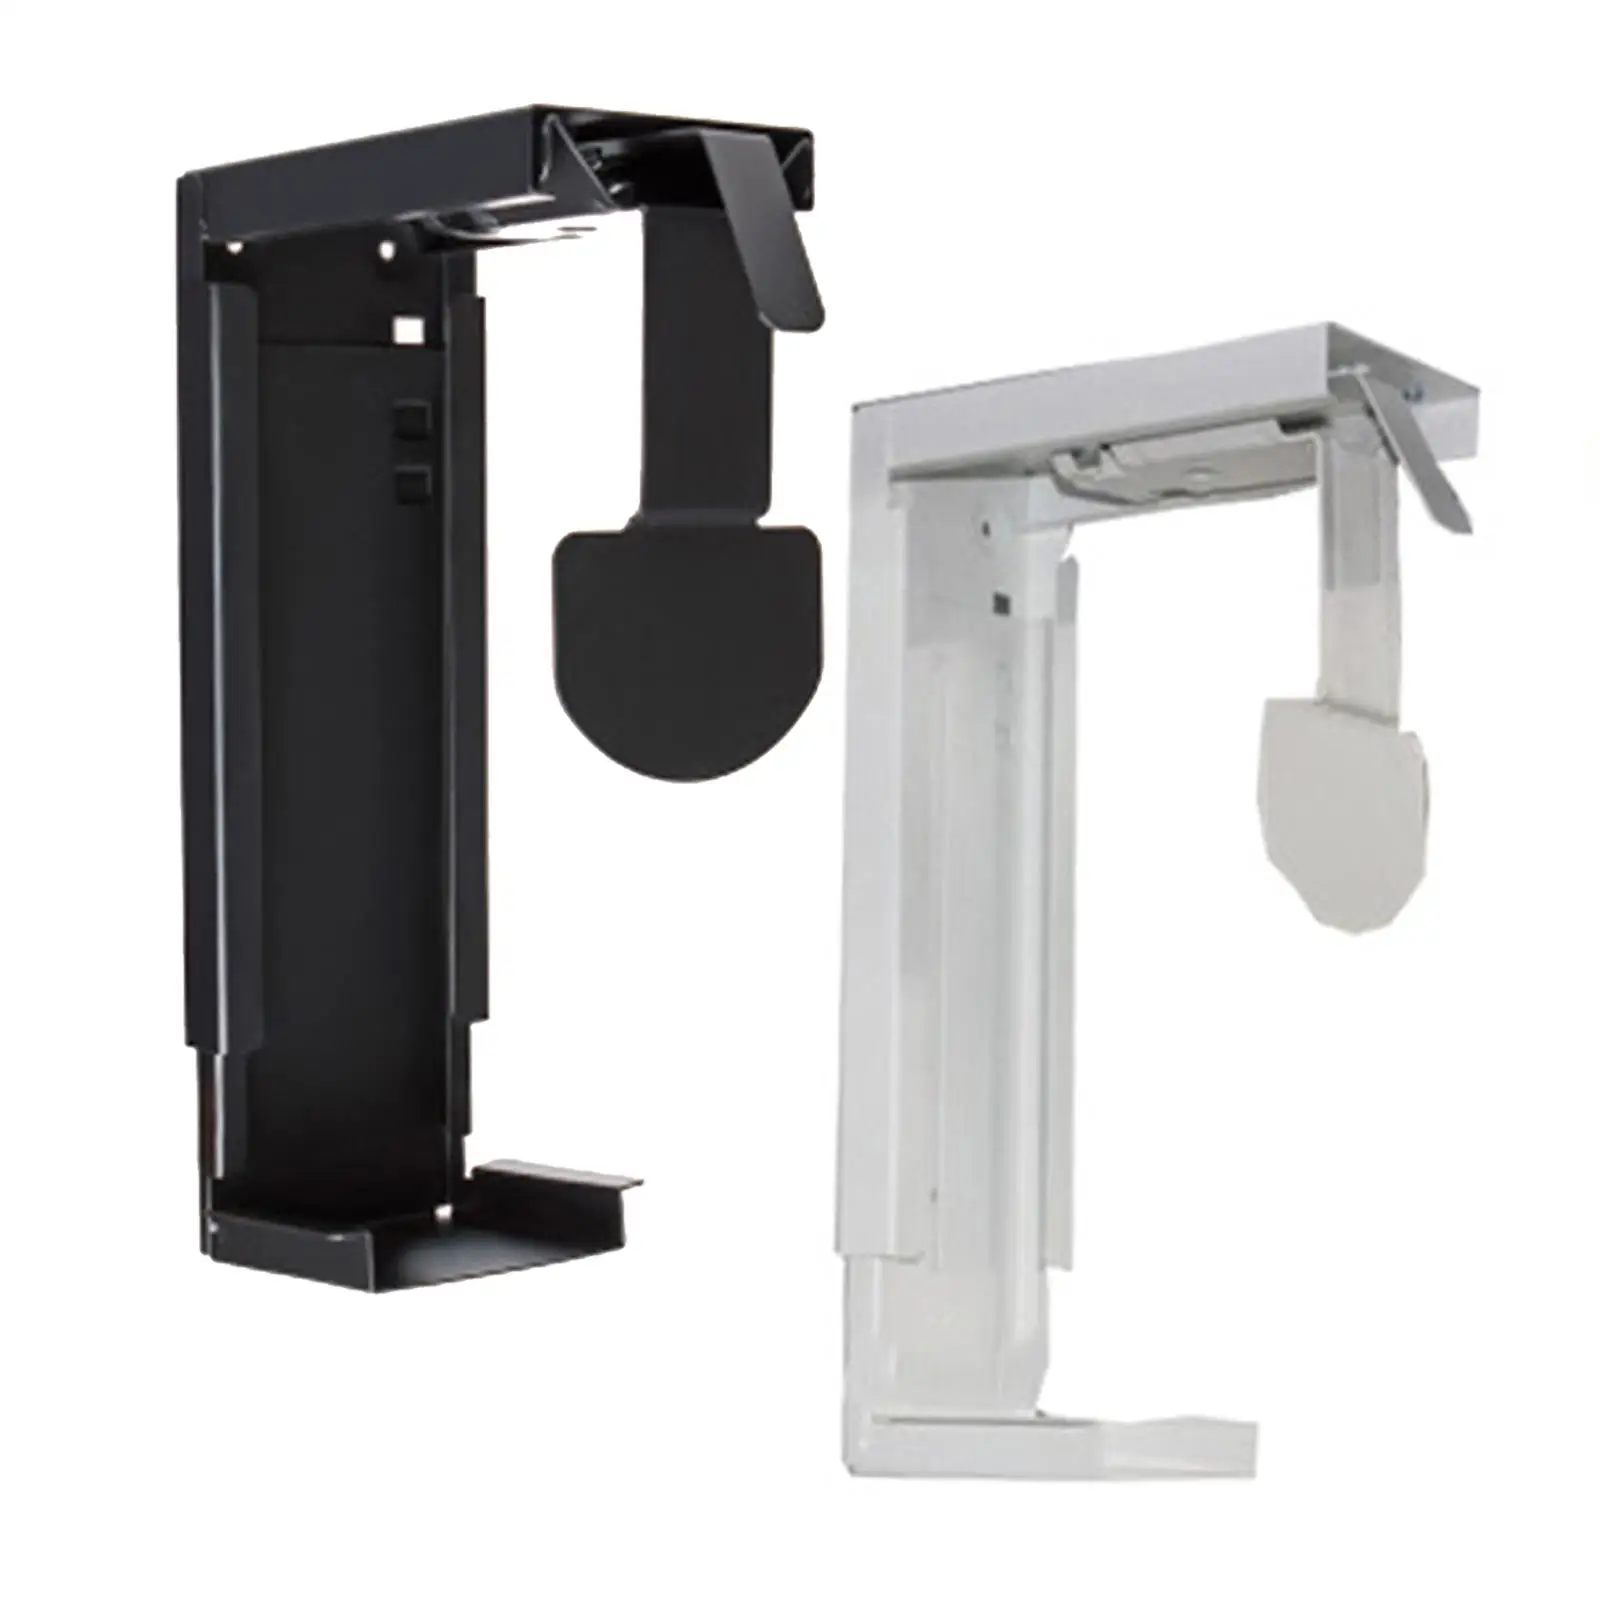  Holder Hanging Rack  Mainframe Box Hanger for Computers Supplies